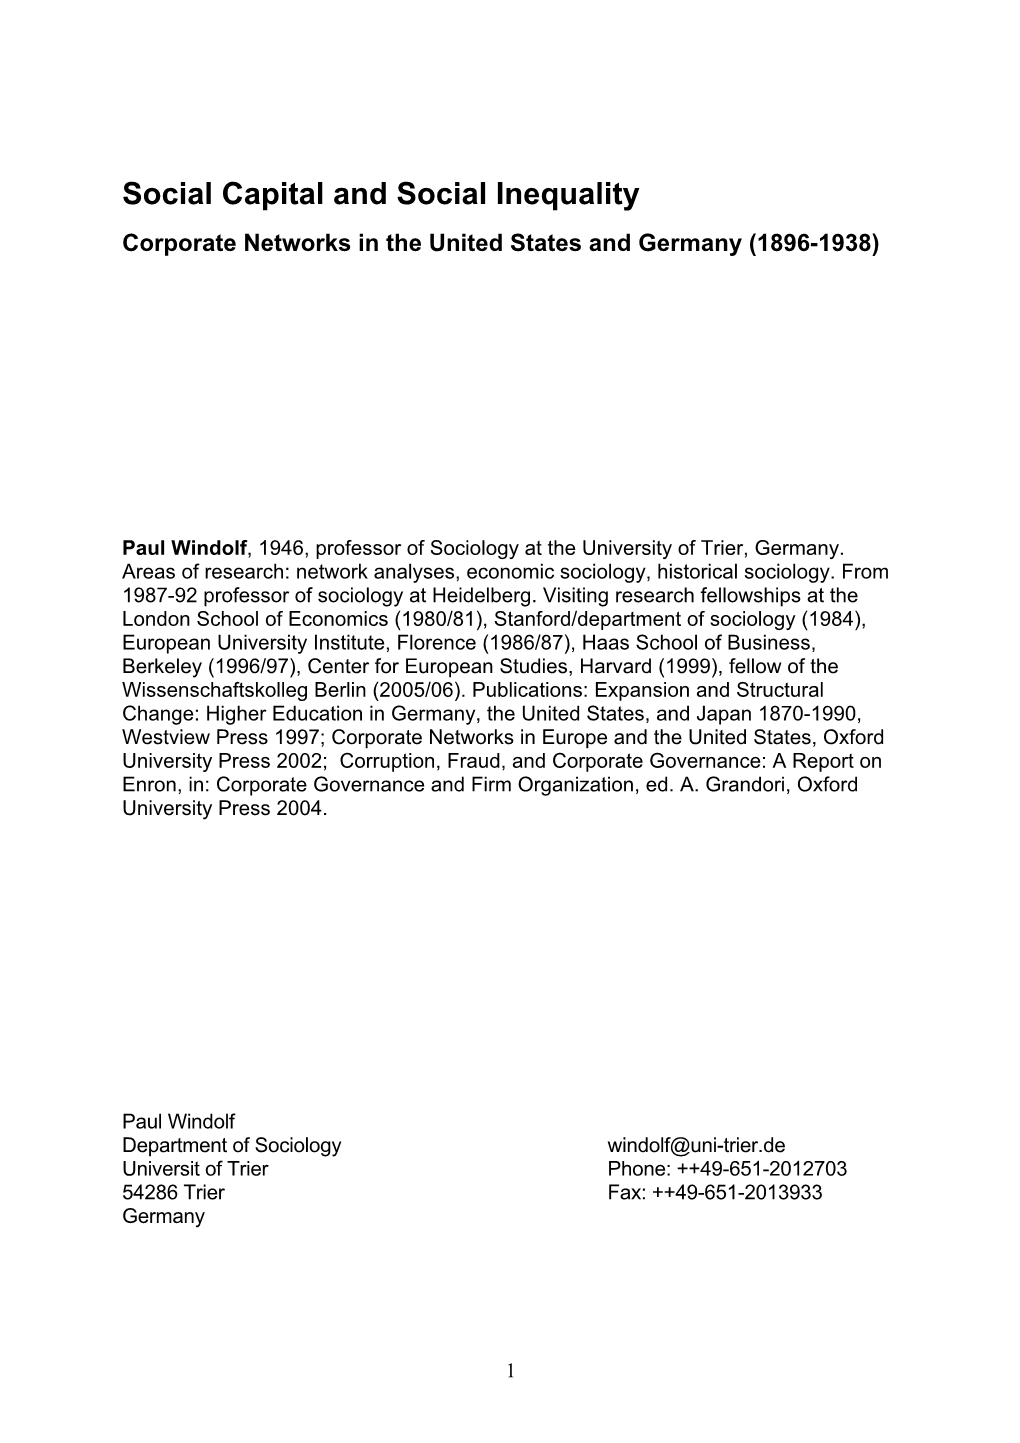 Social Capital and Social Inequality Corporate Networks in the United States and Germany (1896-1938)